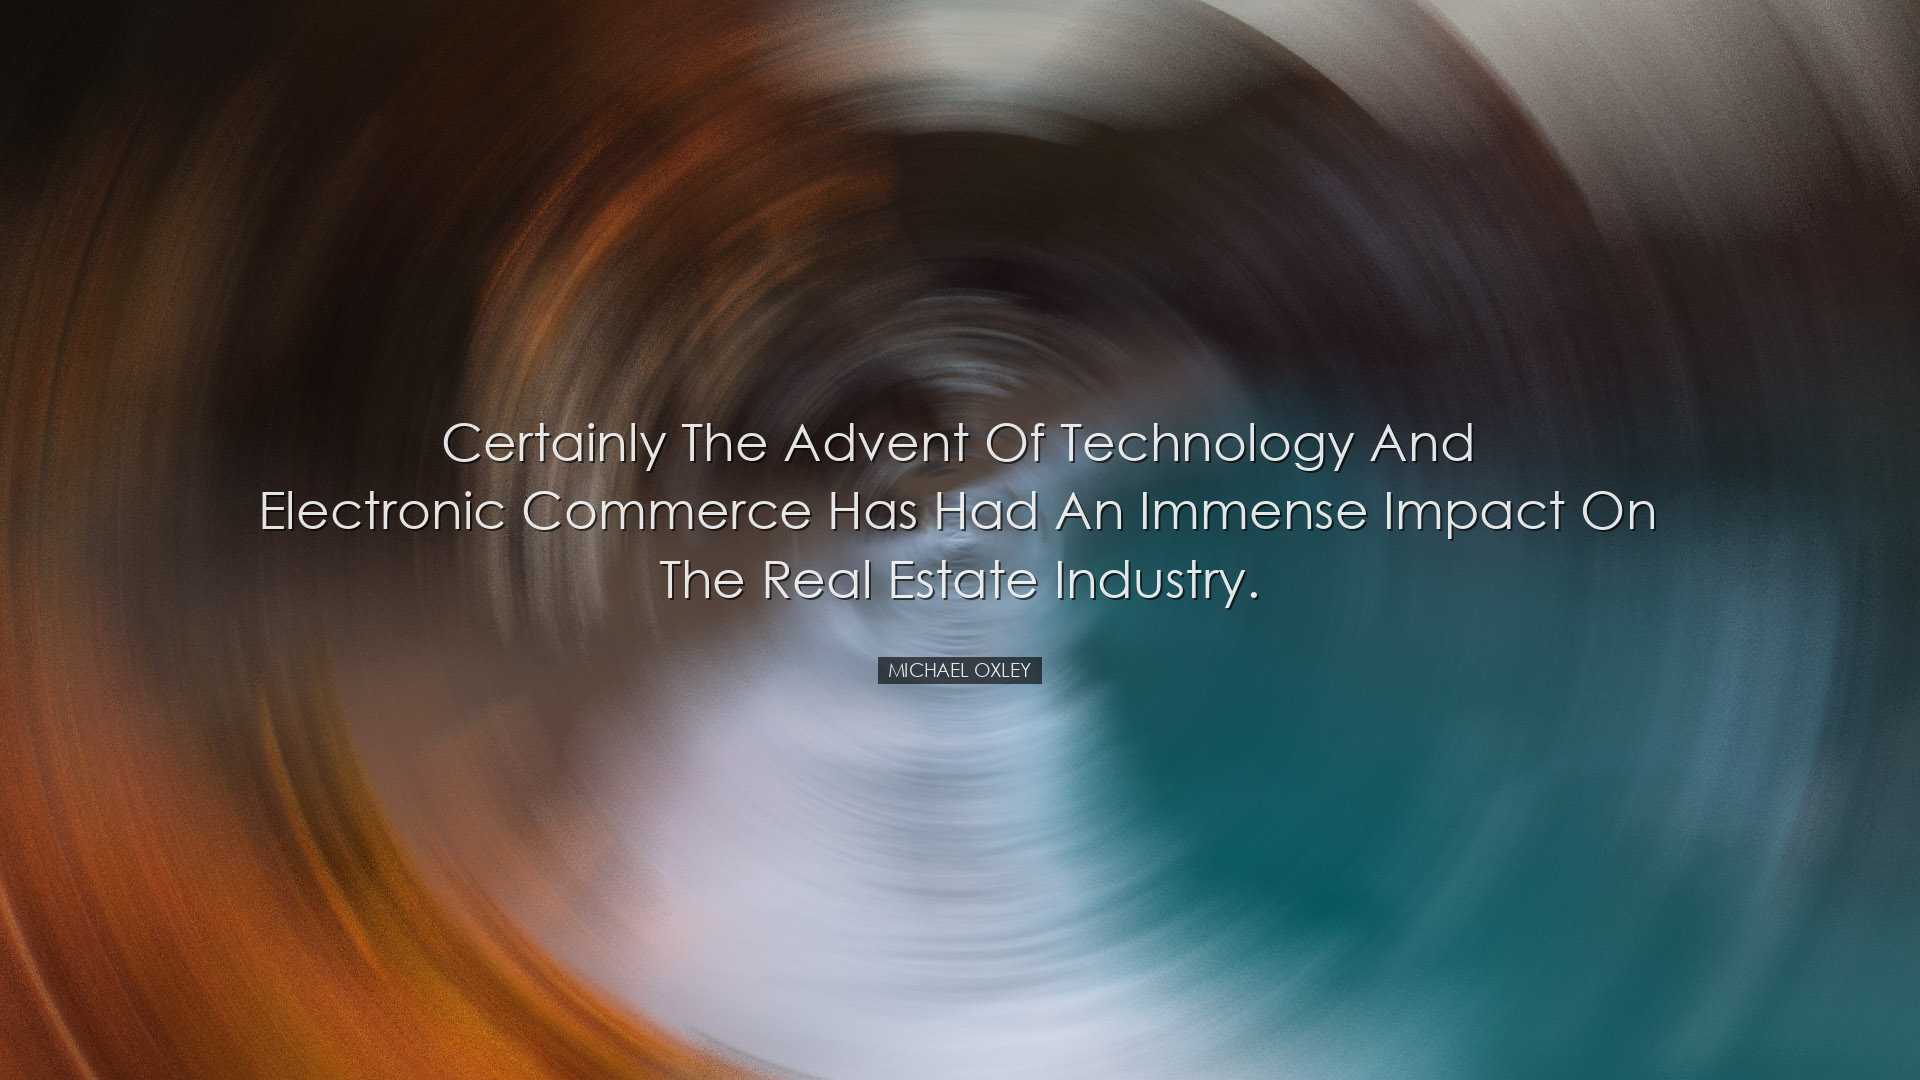 Certainly the advent of technology and electronic commerce has had